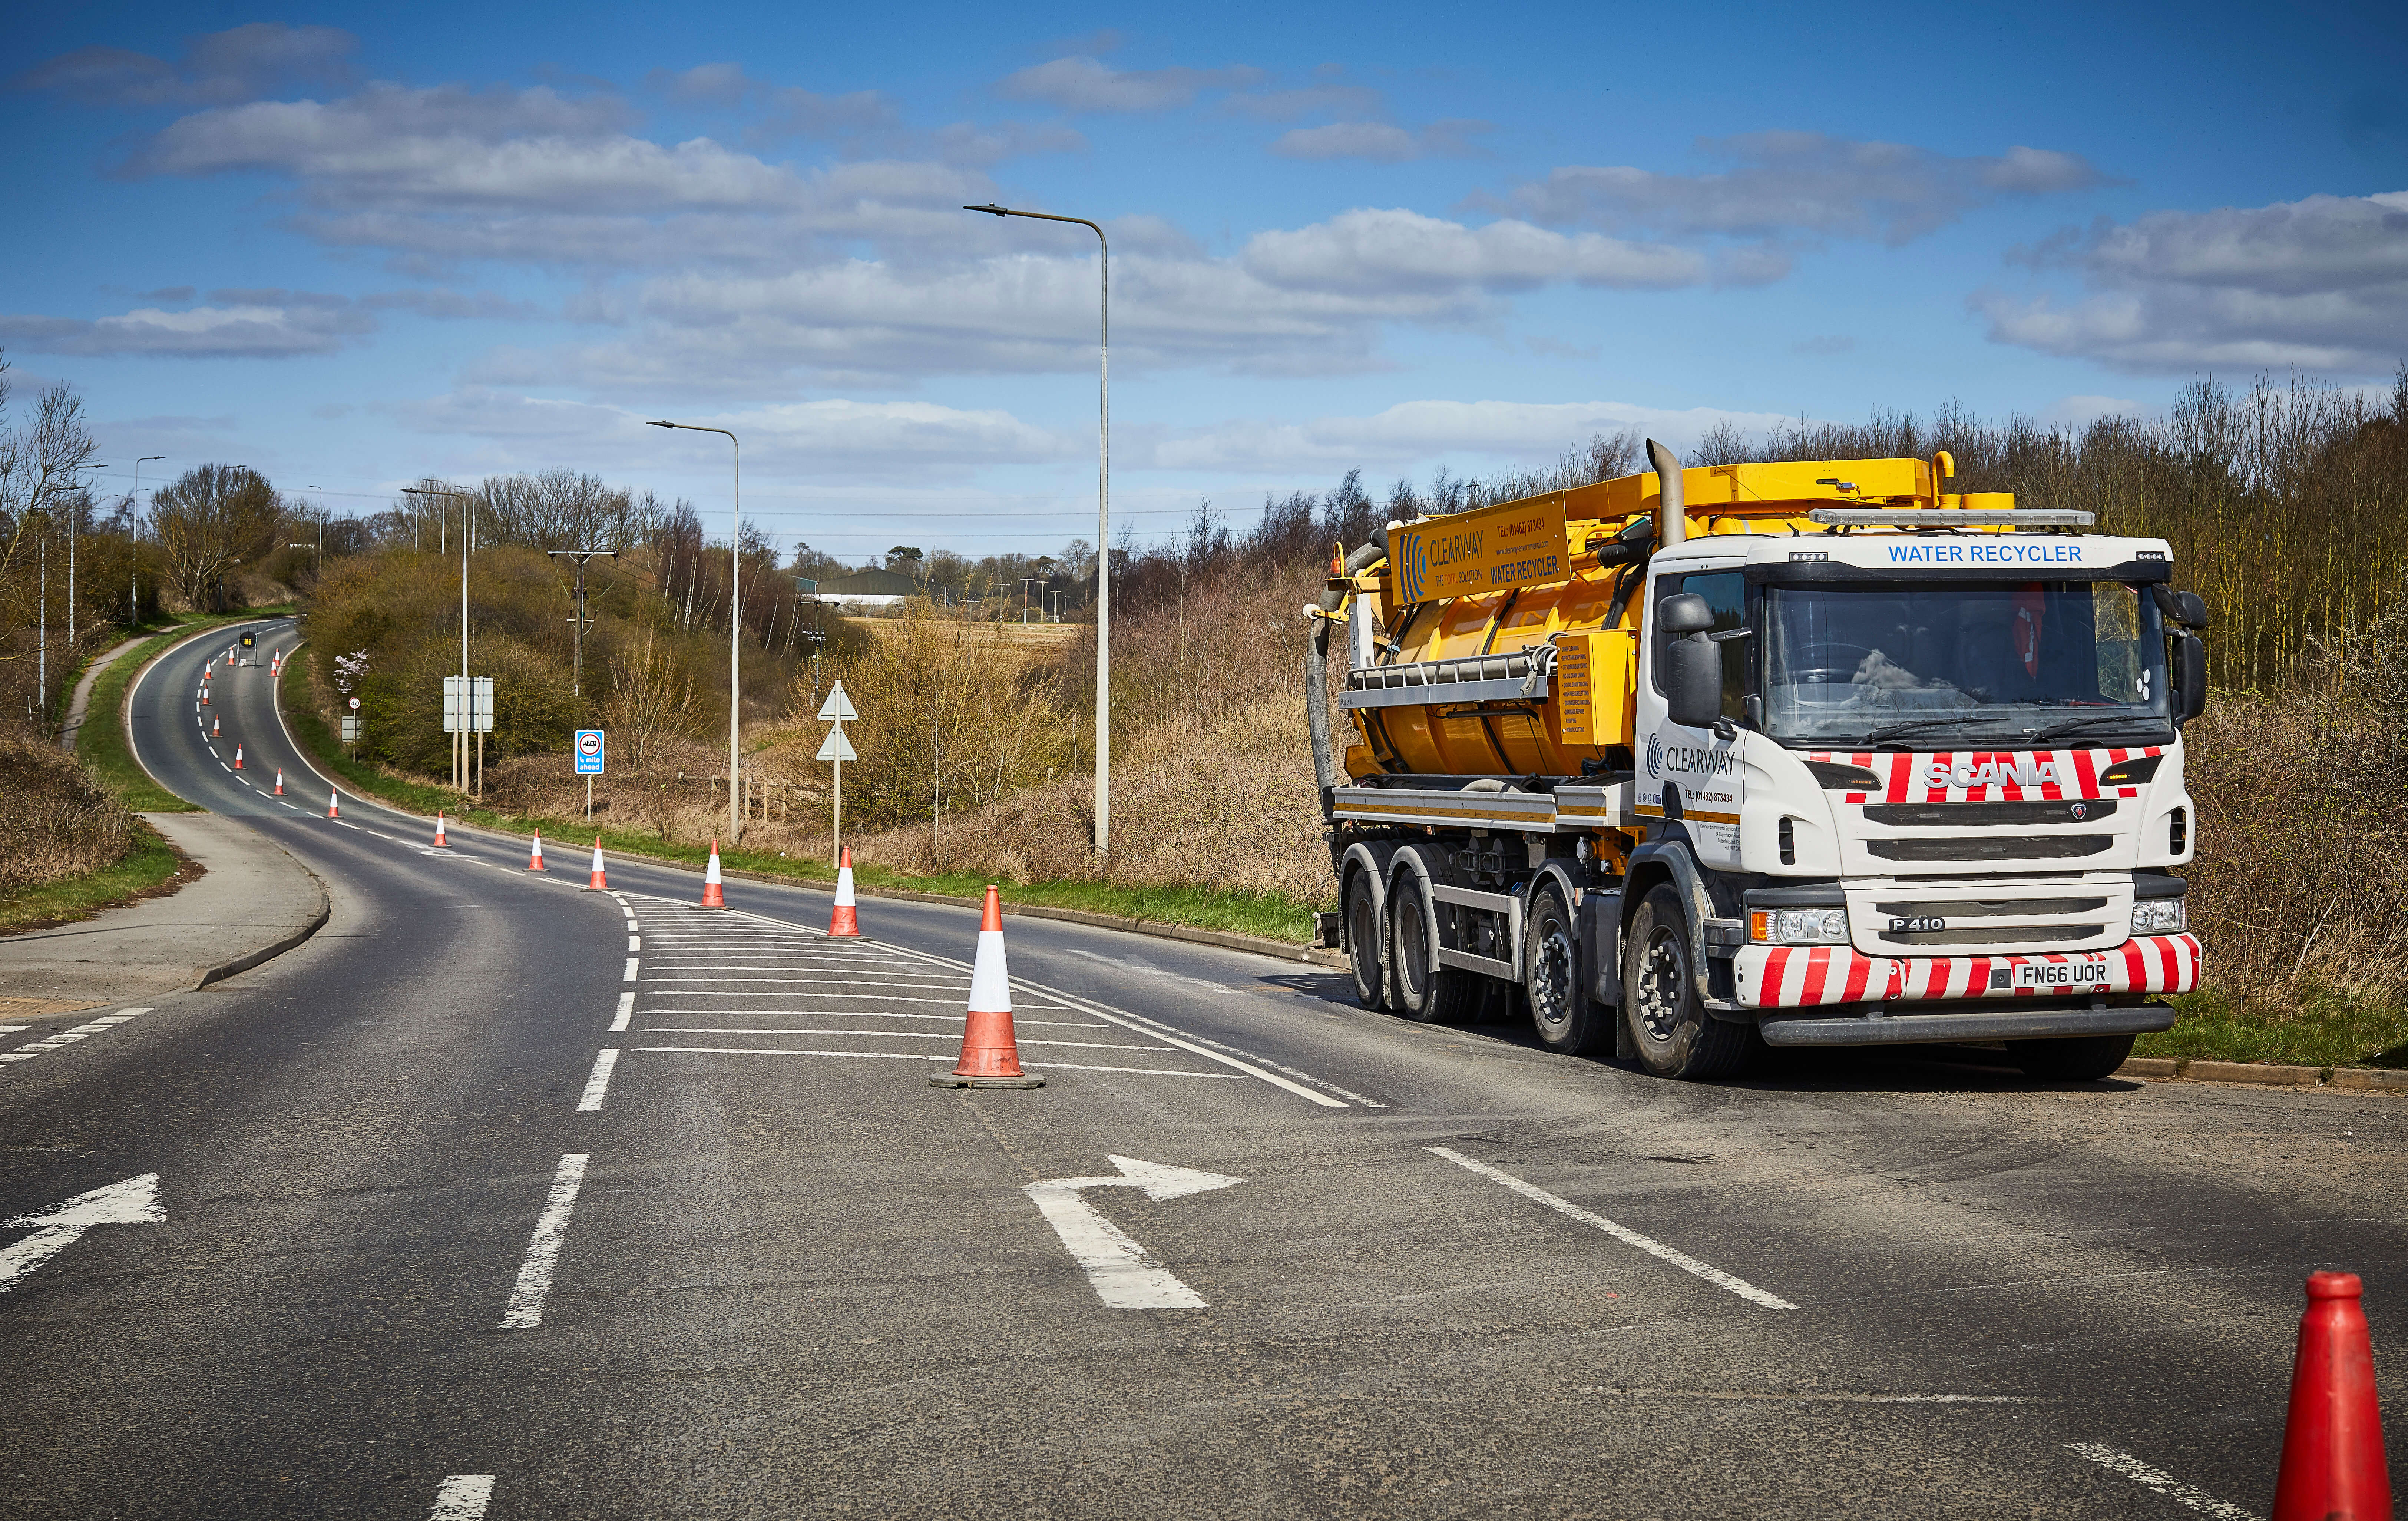 traffic management hull & yorkshire - water recycler